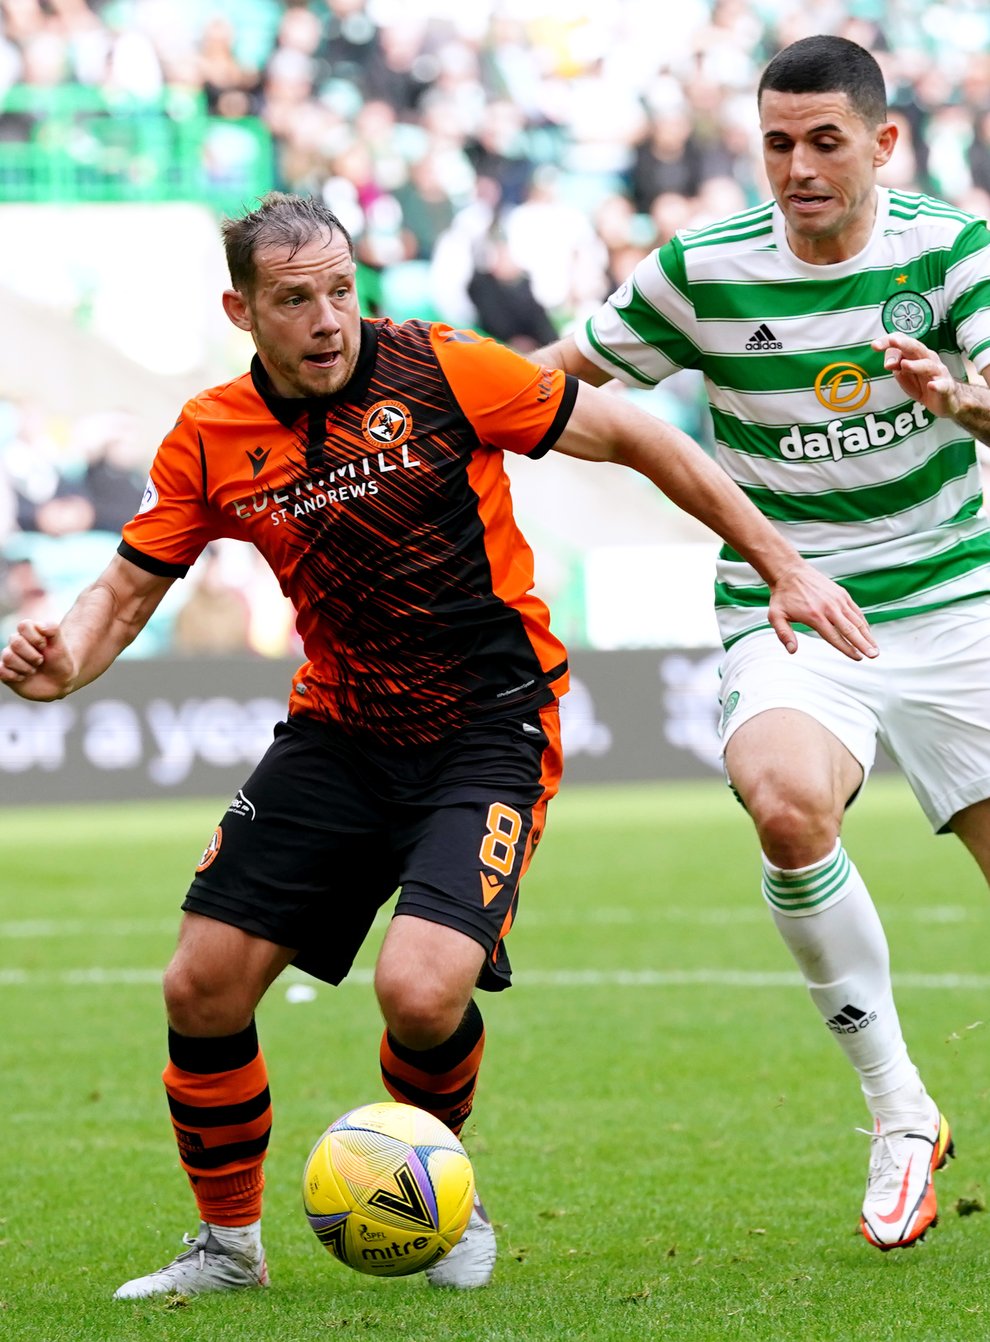 Dundee United’s Peter Pawlett (left) looking to go again after winter break (Jane Barlow/PA)